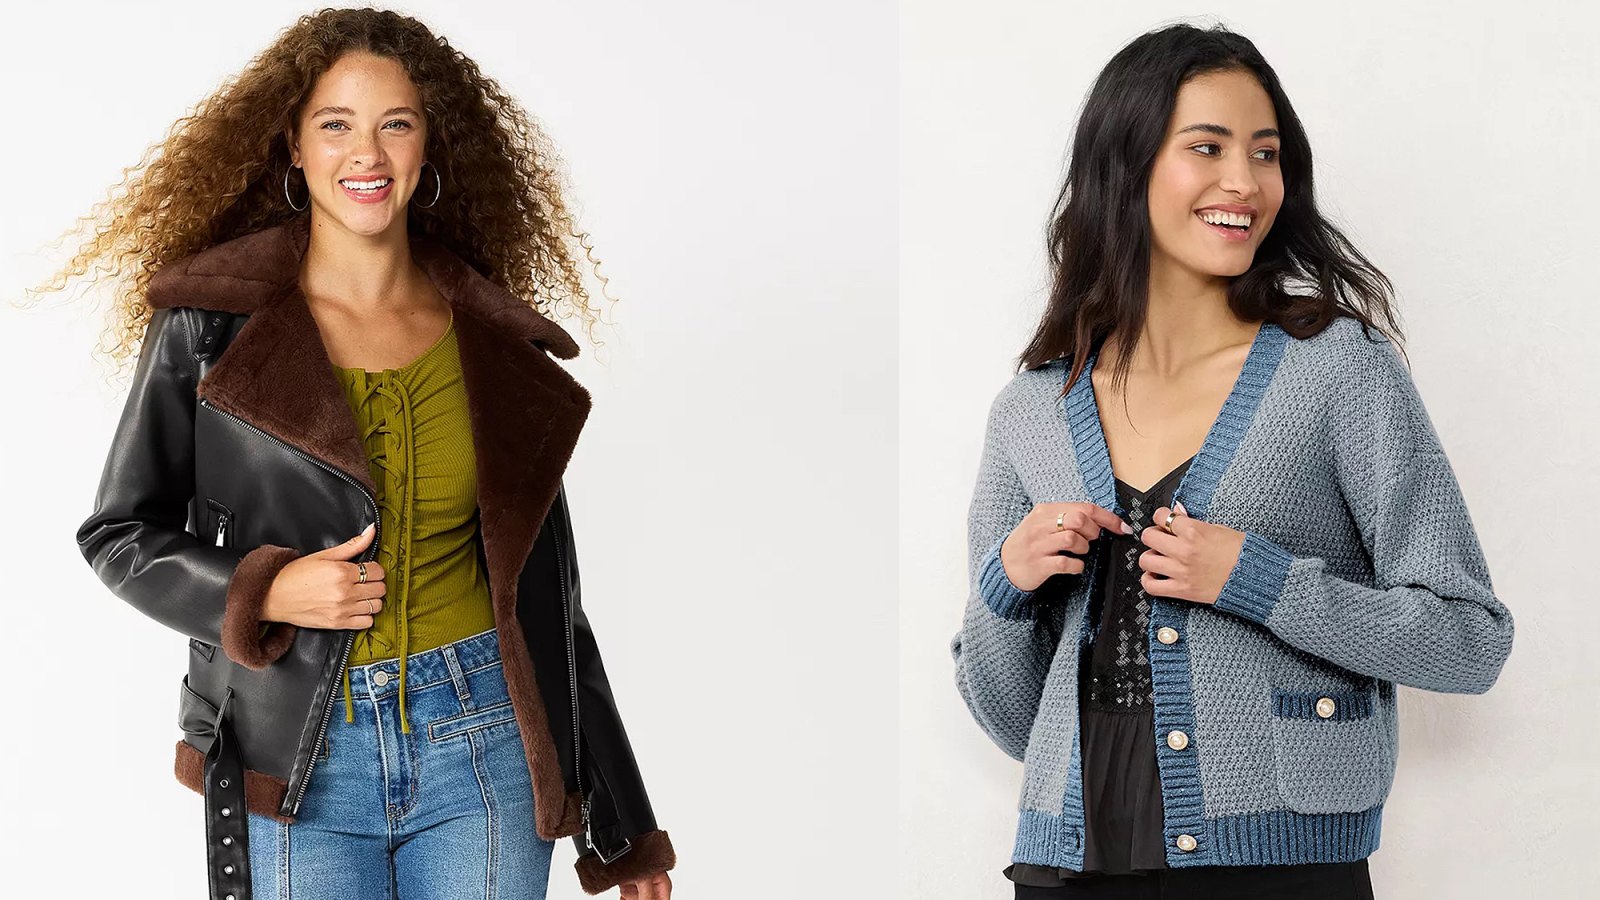 Kohl's: 15 Fashion Finds That Could Pass As Designer